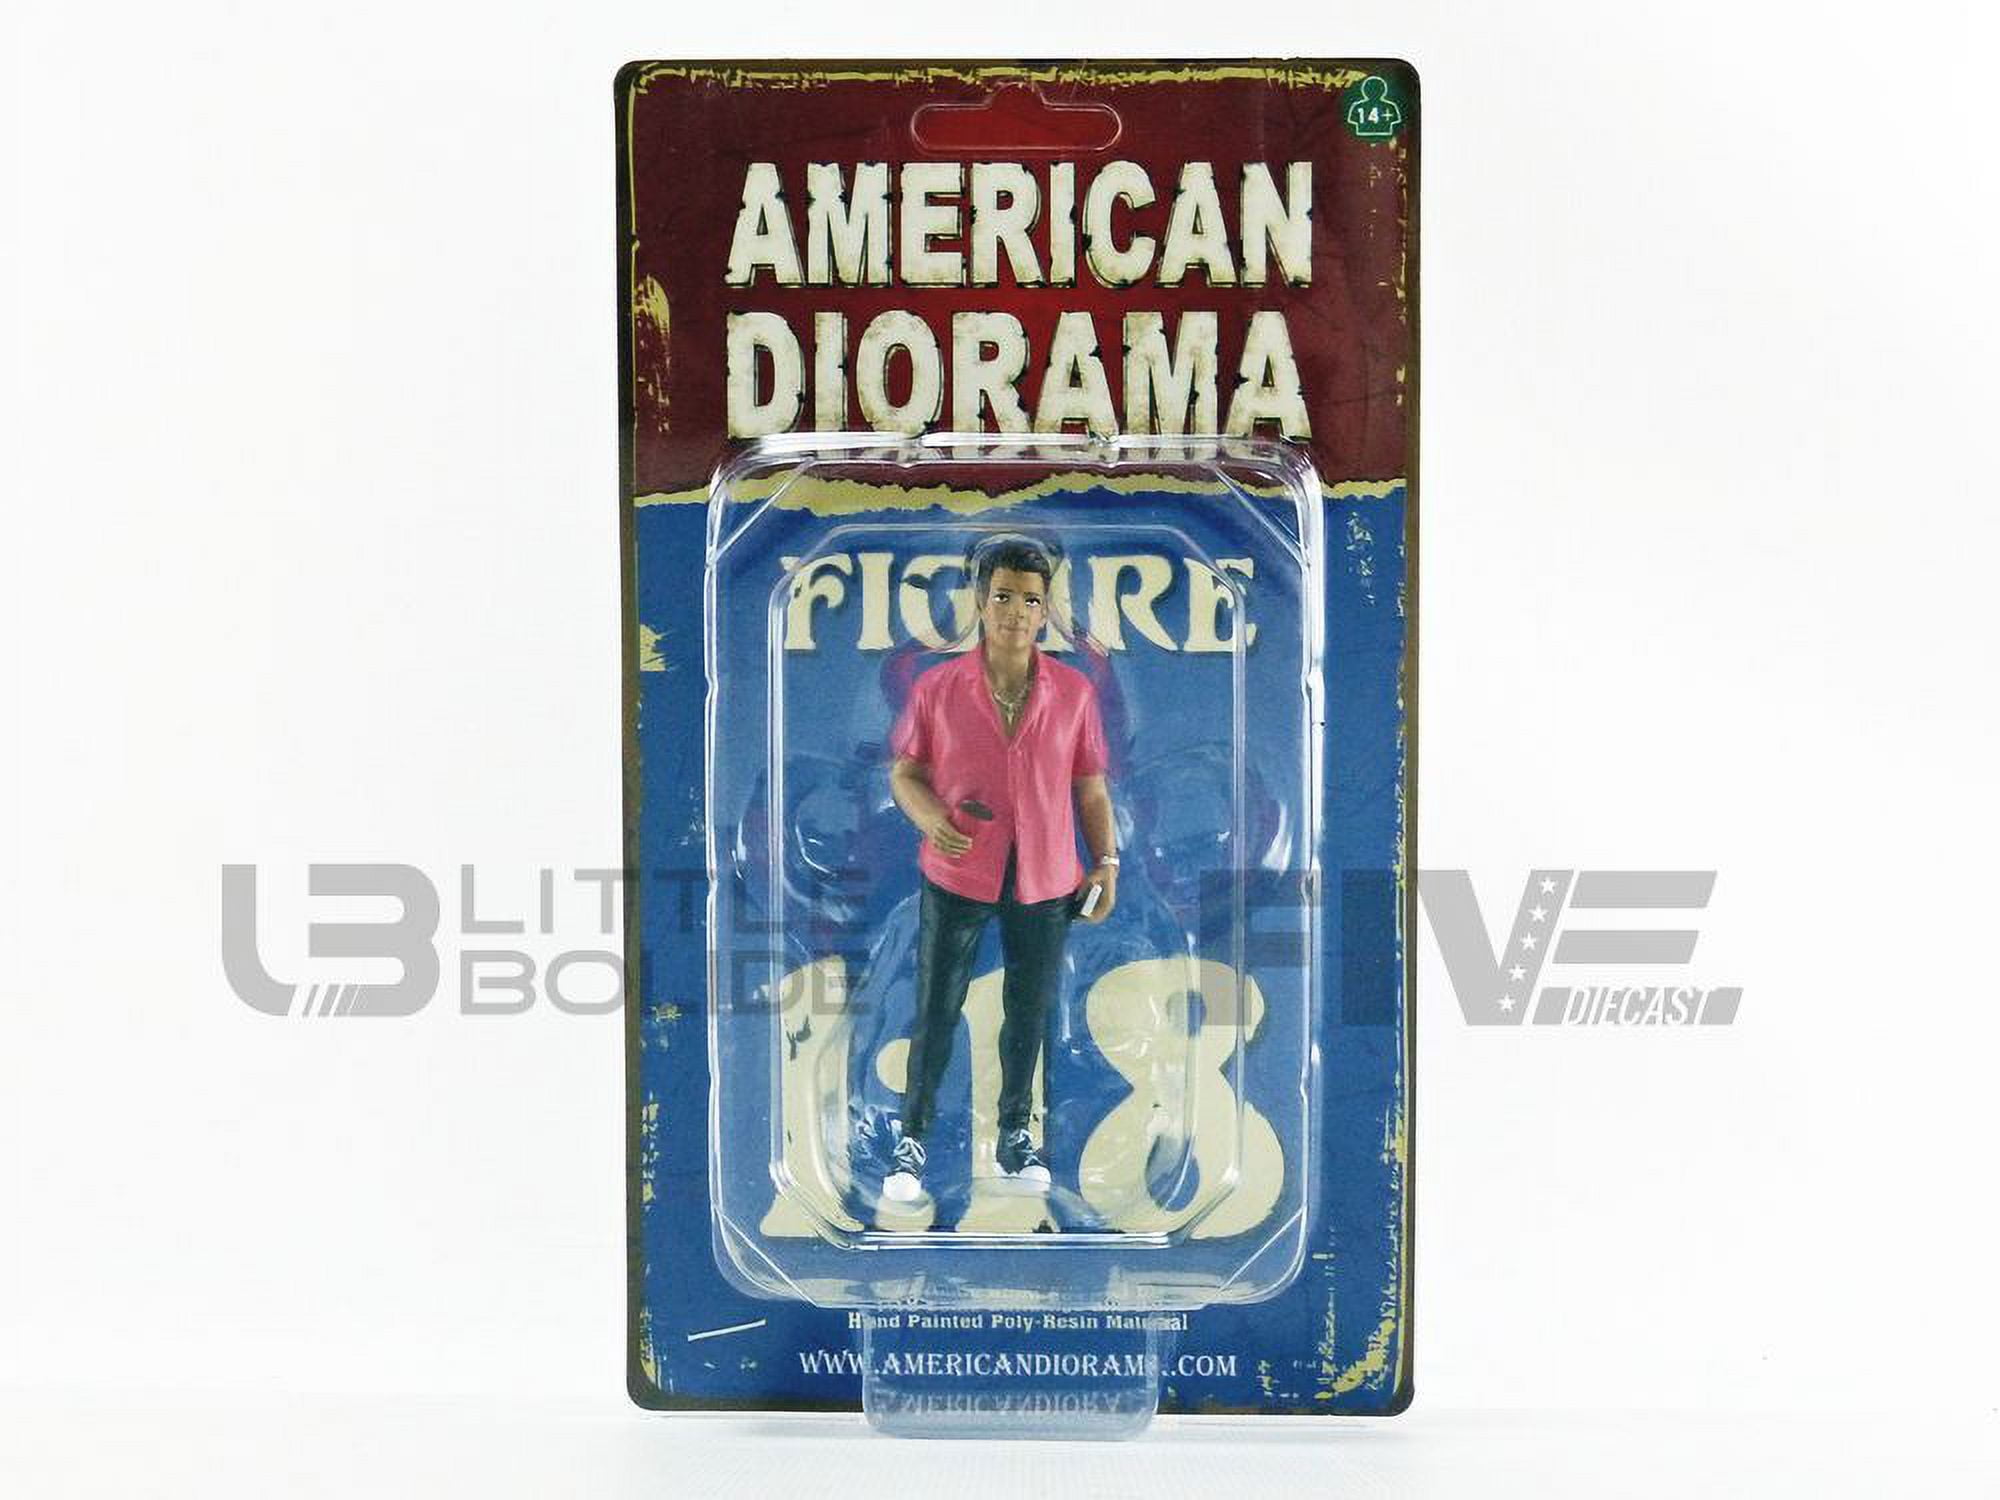 Picture of American Diorama 38226 Partygoers Figurine VI for 1 by 18 Scale Models